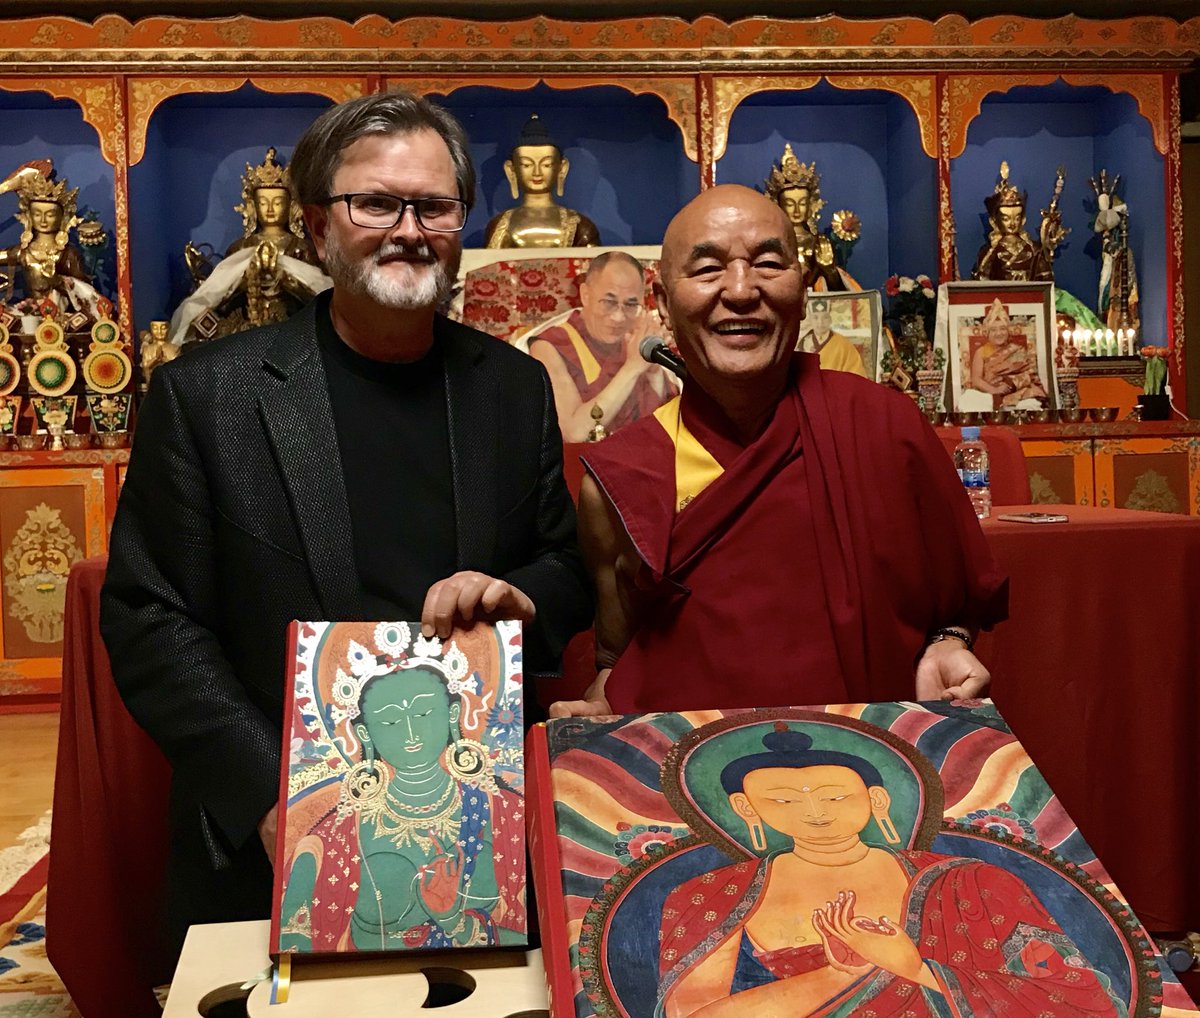 Thubten Wangchen On Twitter Yesterday On 4th June Presentation Of Murals Of Tibet By Thomas Laird In Casa Del Tibet Barcelona